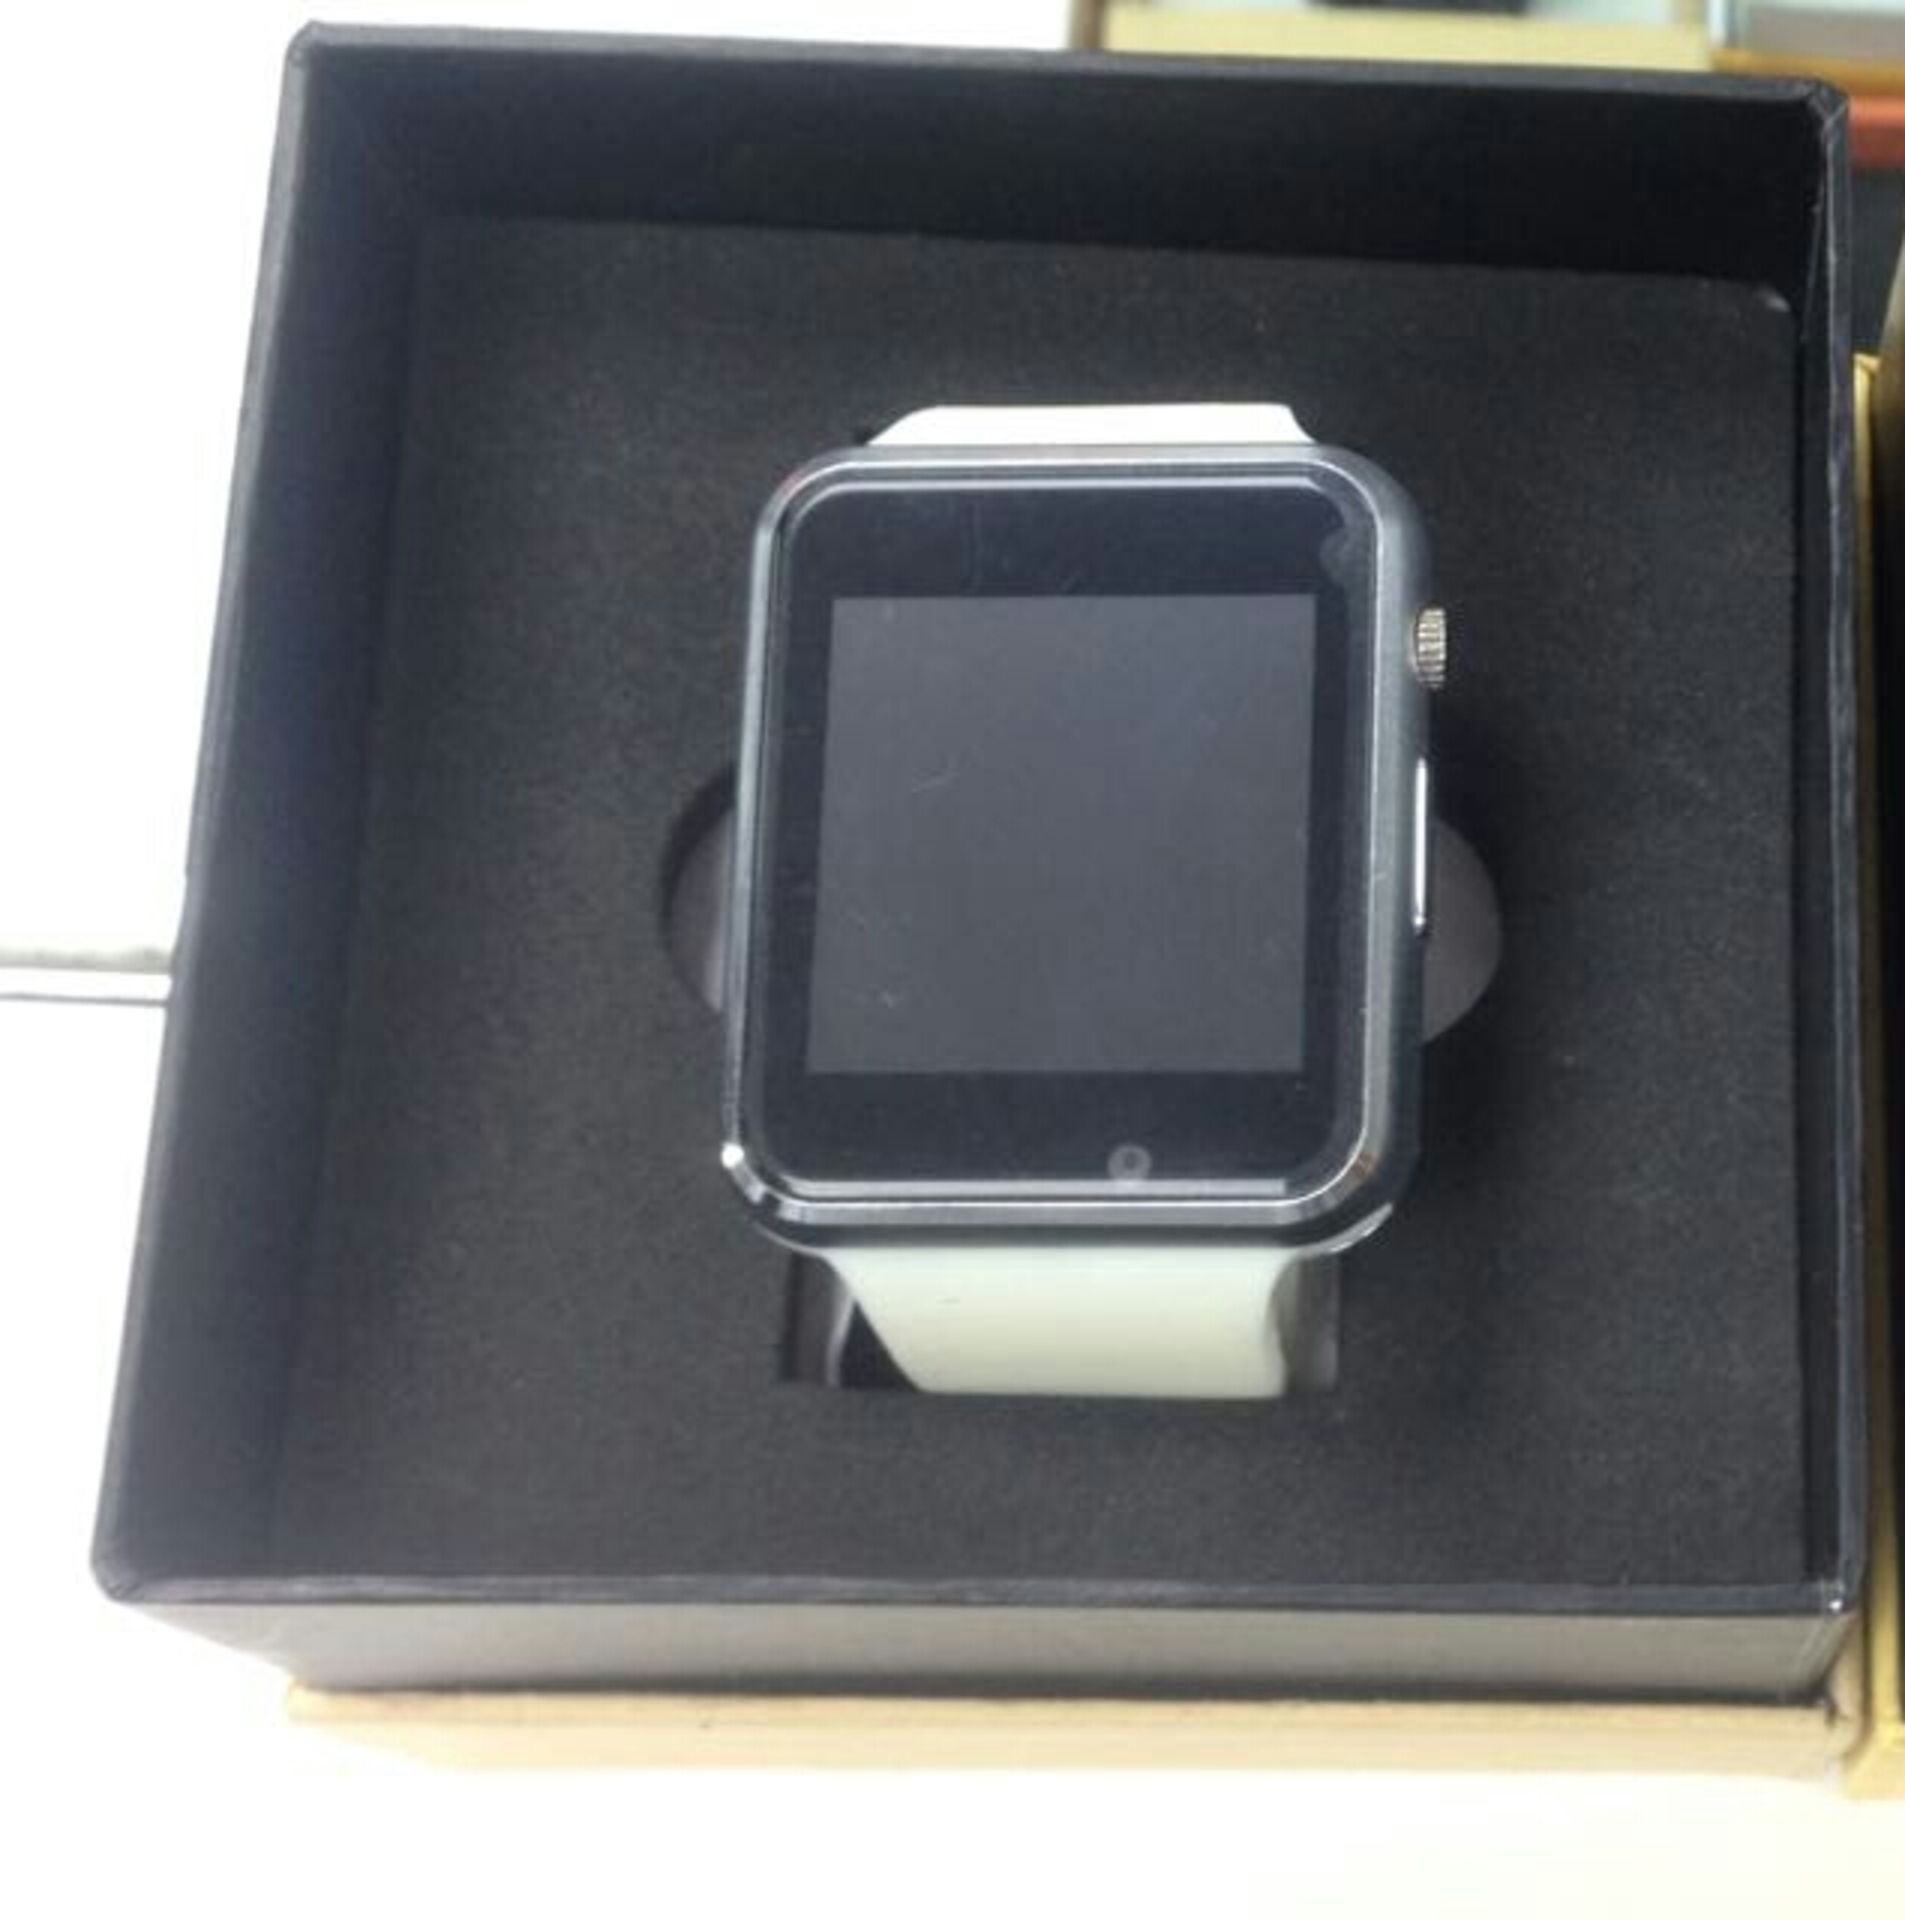 NO VAT 1x BRAND NEW BLUETOOTH SMARTWATCH IN BLACK WITH FRONT CAMERA BOXED WITH USB CABLE. IT HAS